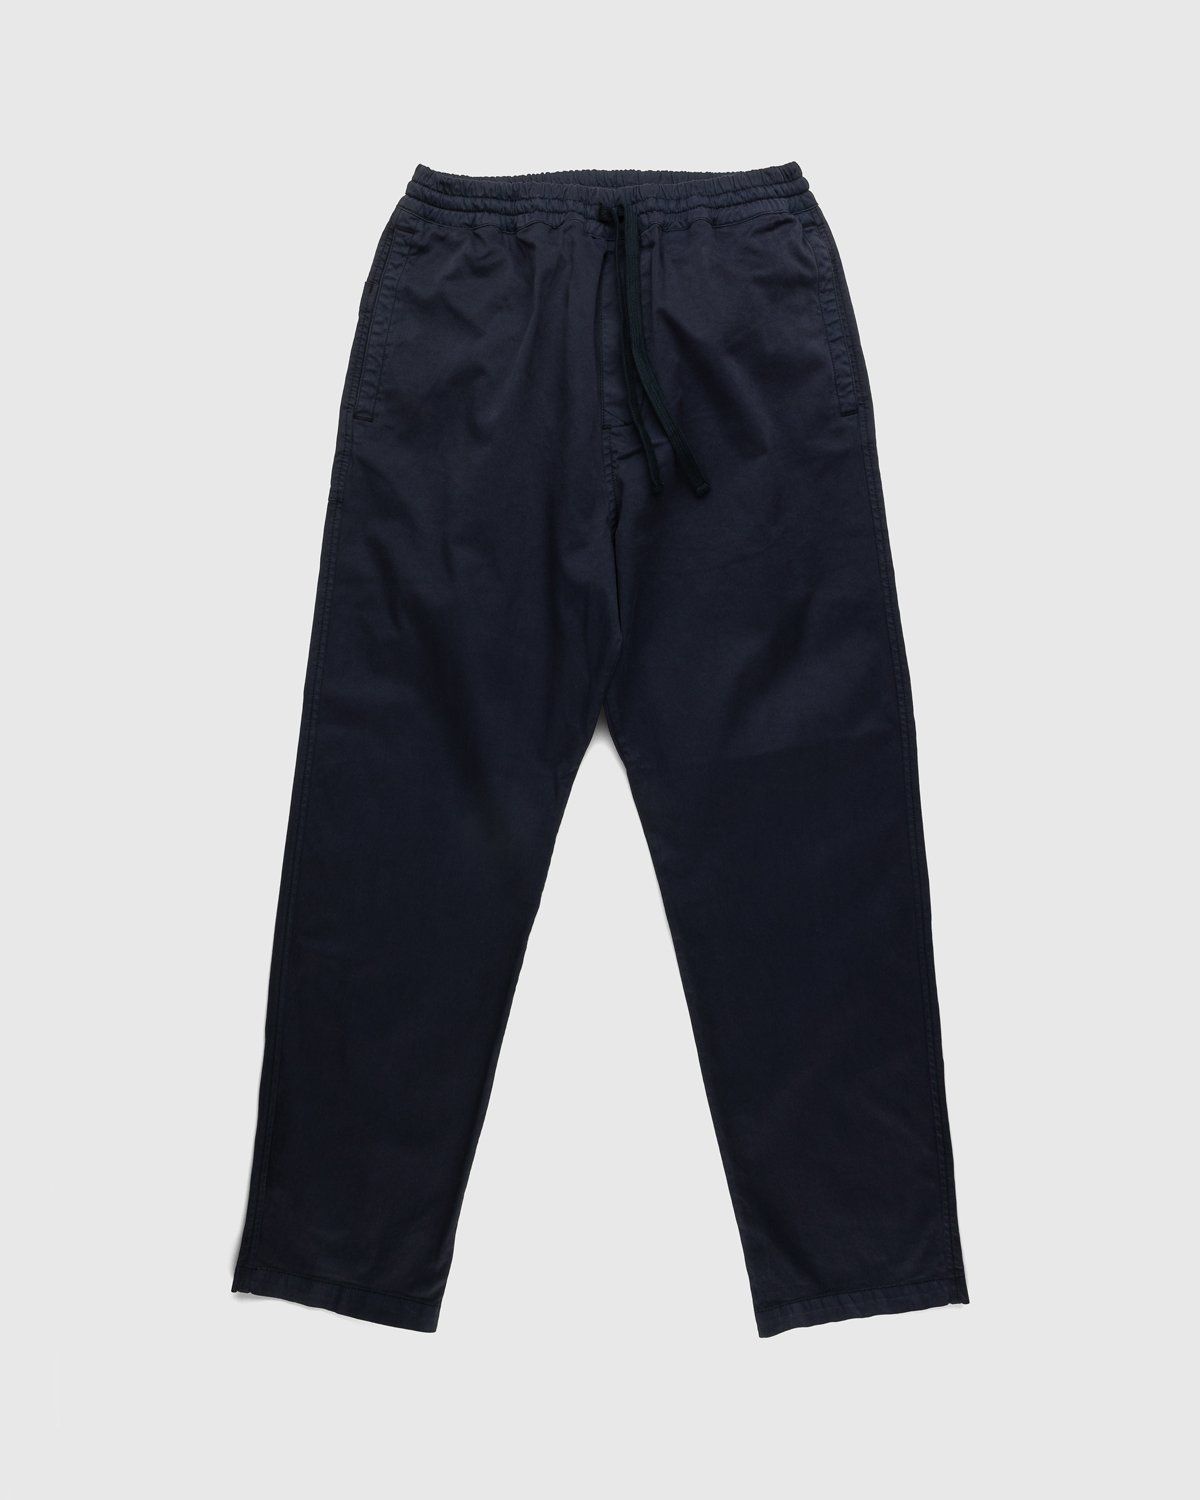 Carhartt WIP – Lawton Pant Navy - Trousers - Blue - Image 1